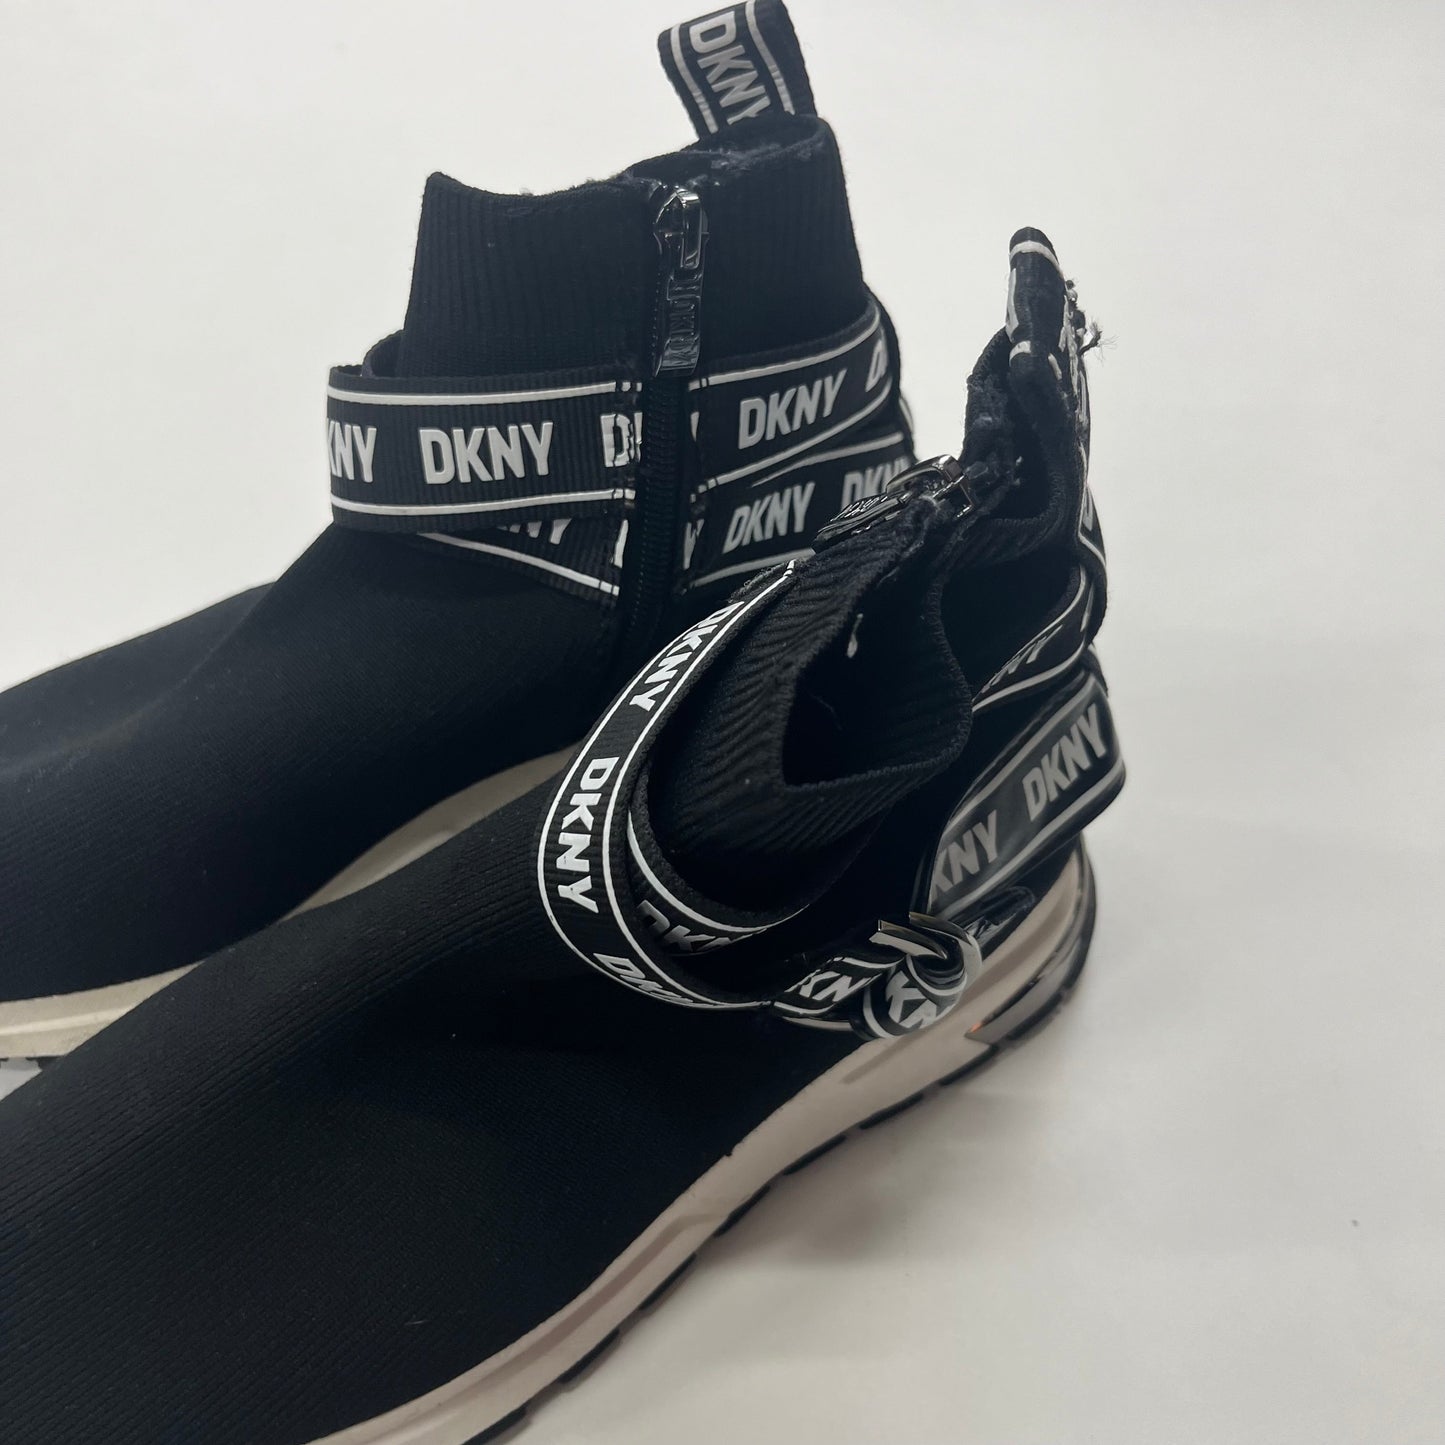 Black Shoes Athletic Dkny, Size 8